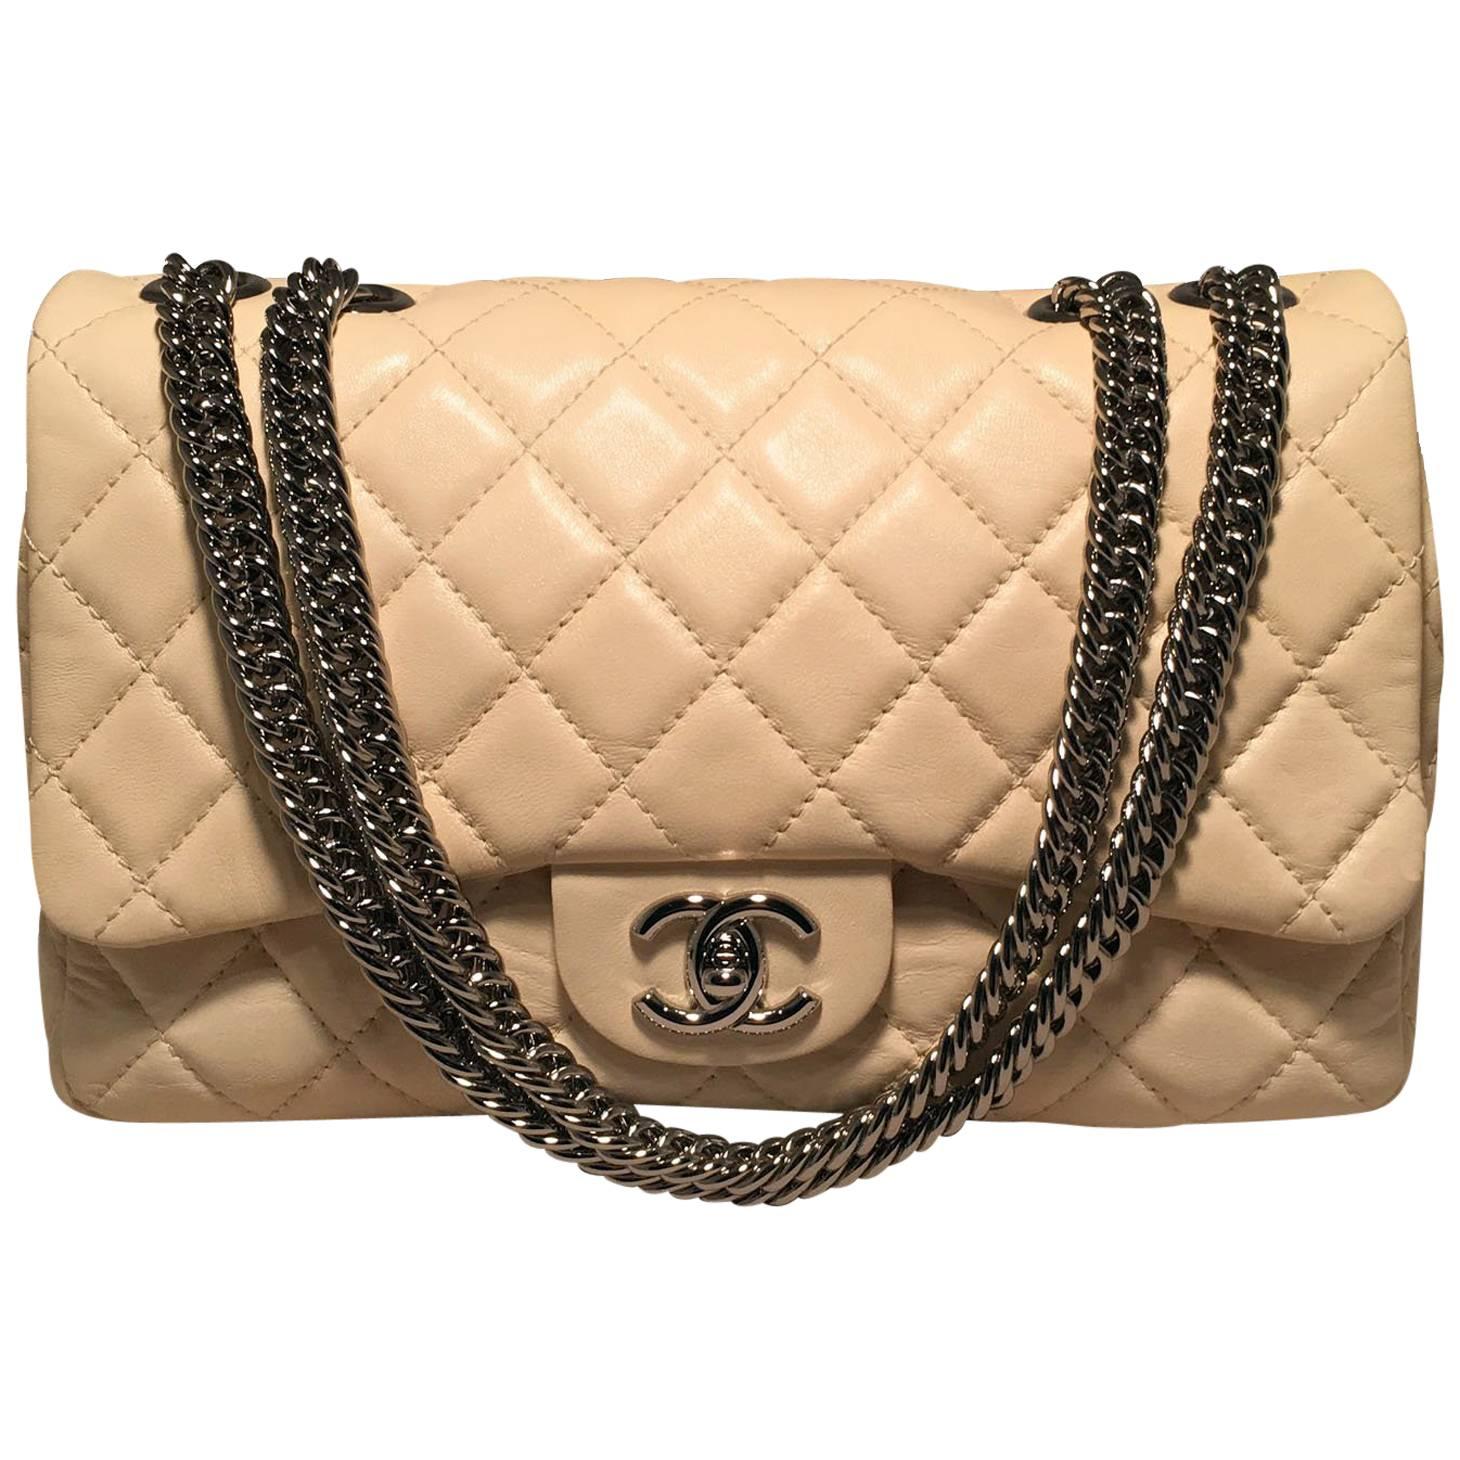 Chanel Cream Quilted Leather Classic Flap Shoulder Bag